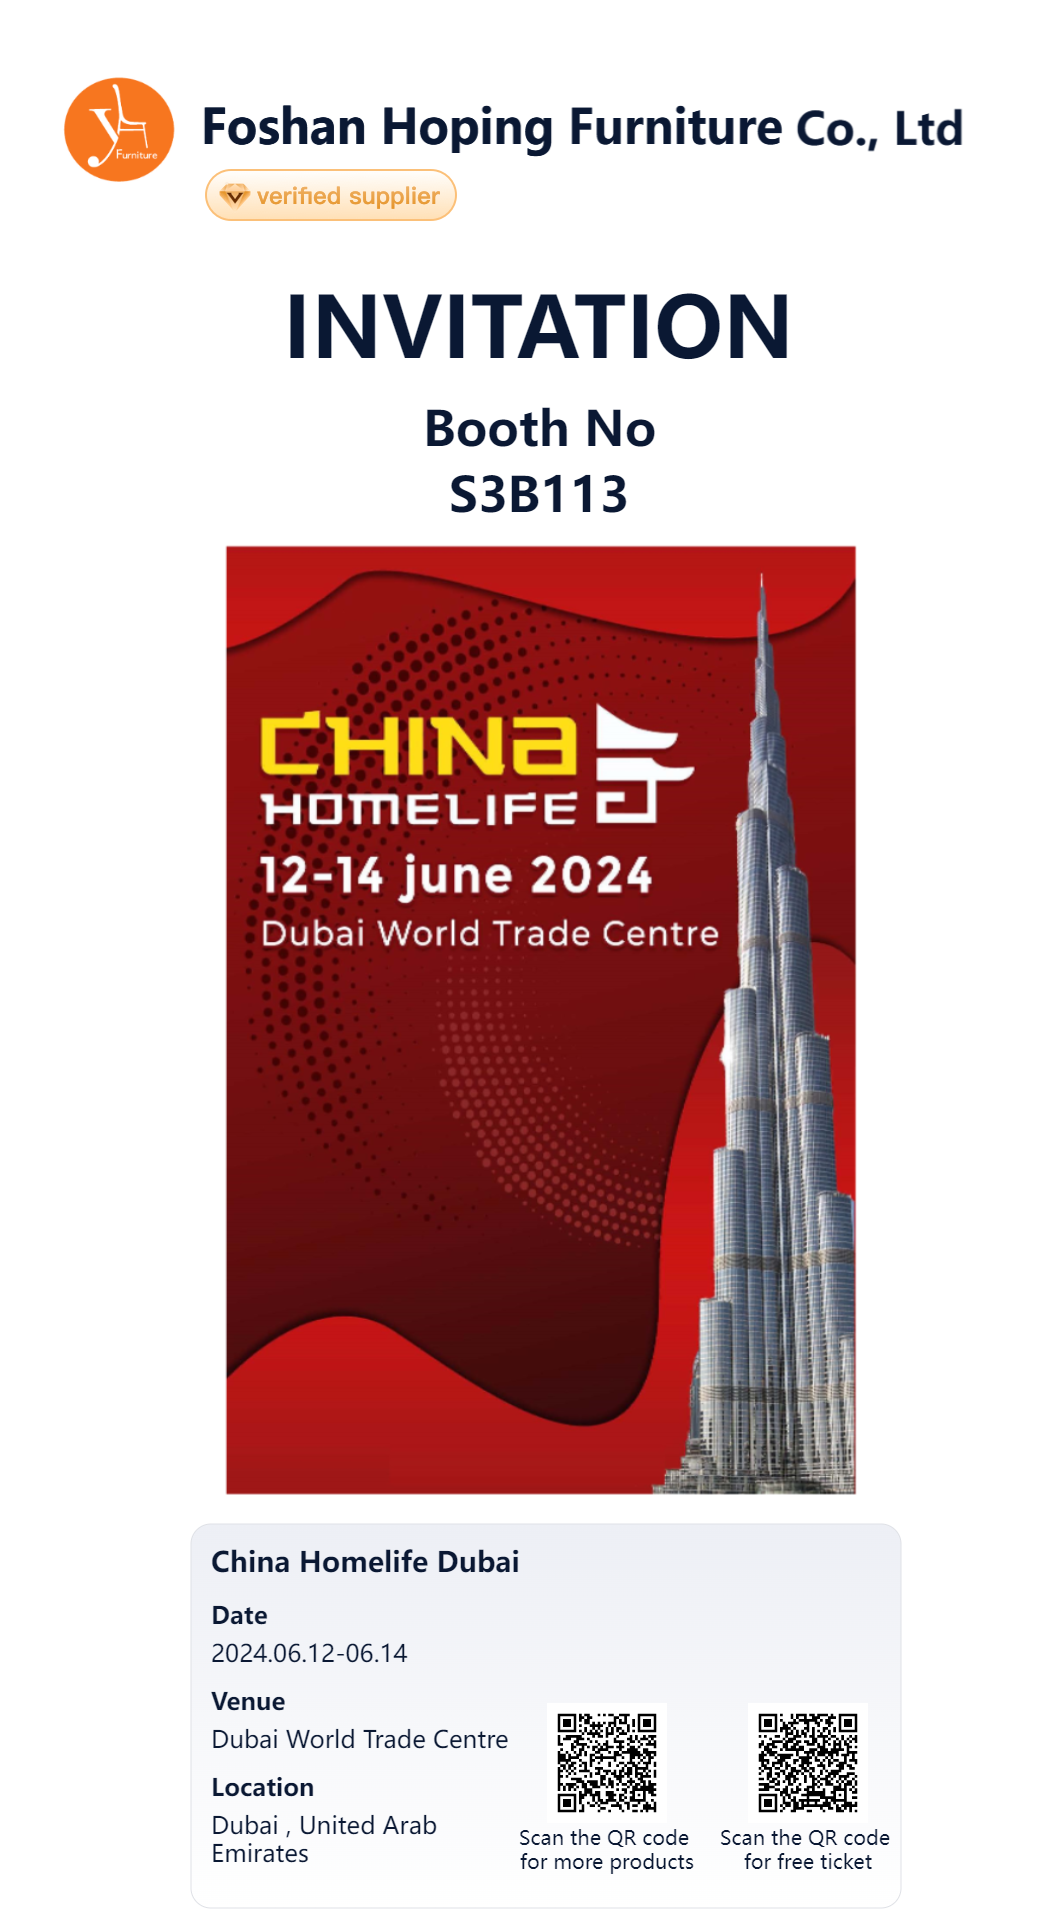 HOPING FURNITURE will be waiting for you at the 16th China (UAE) Trade Fair in Dubai World Trade Center